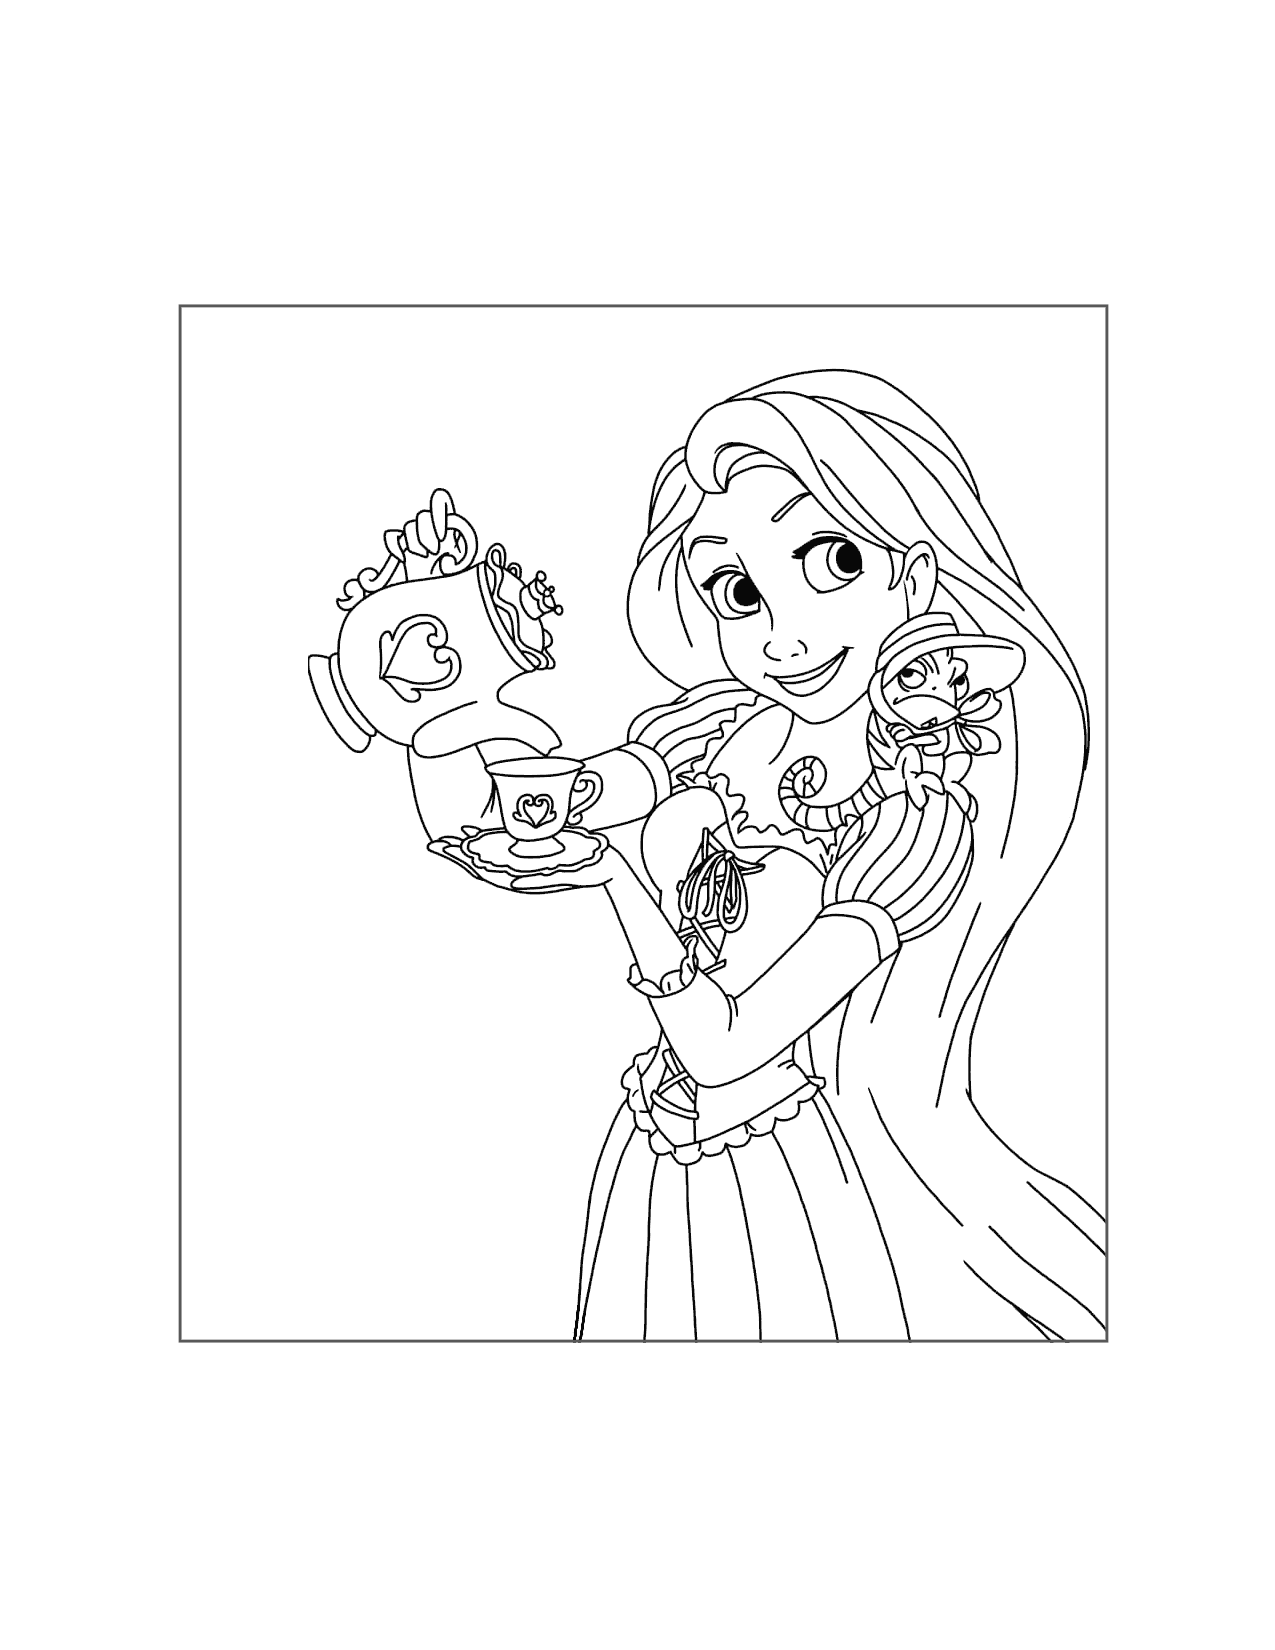 Teatime With Rapunzel And Pascal Coloring Page